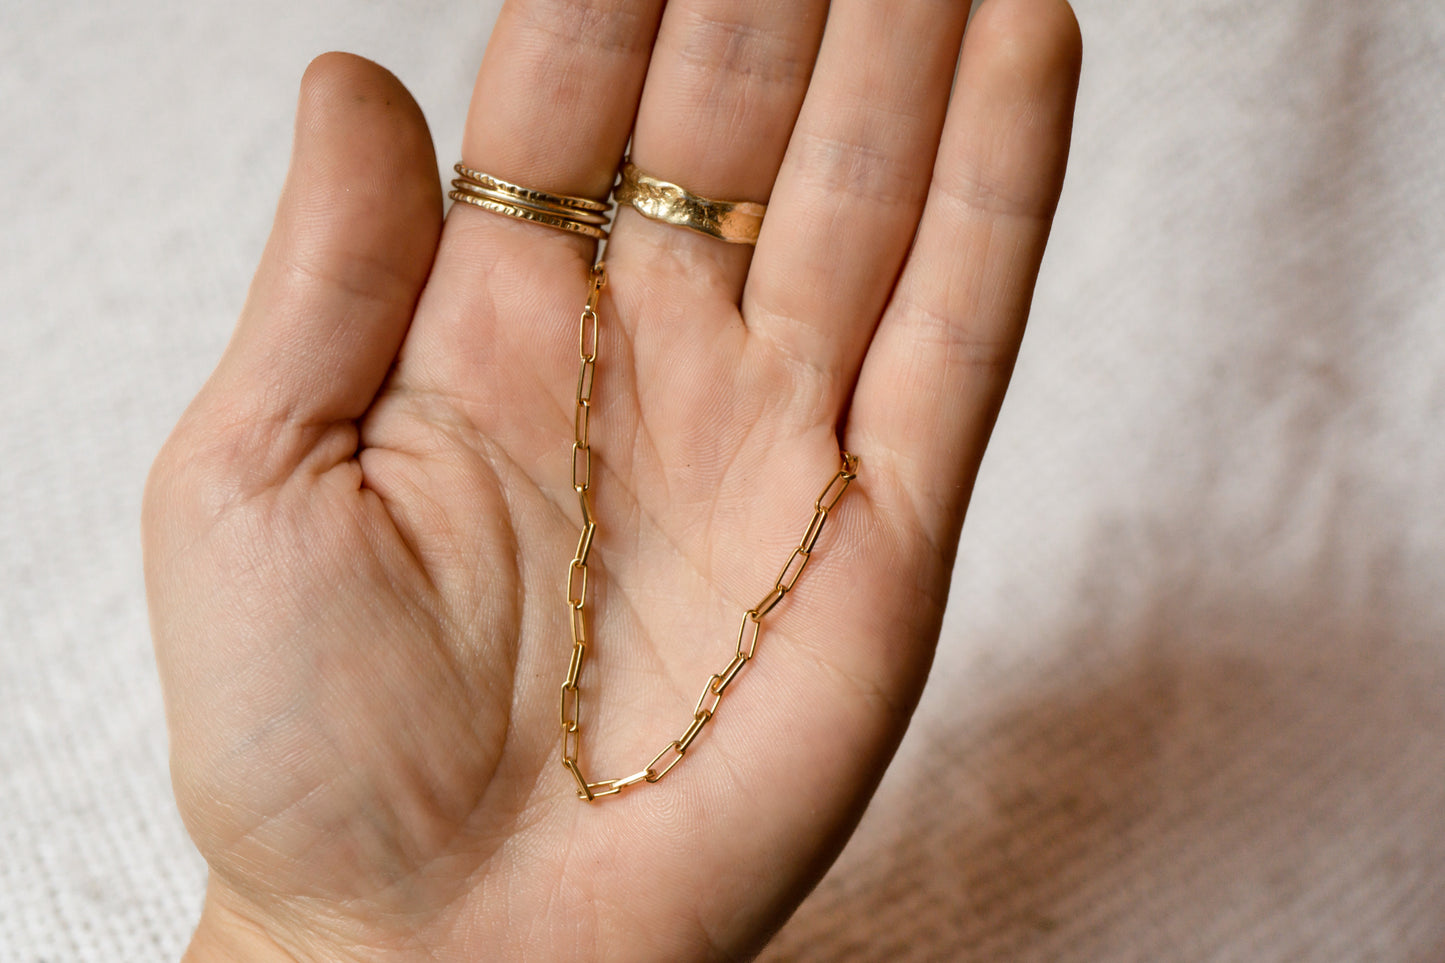 Linked necklace - gold plated